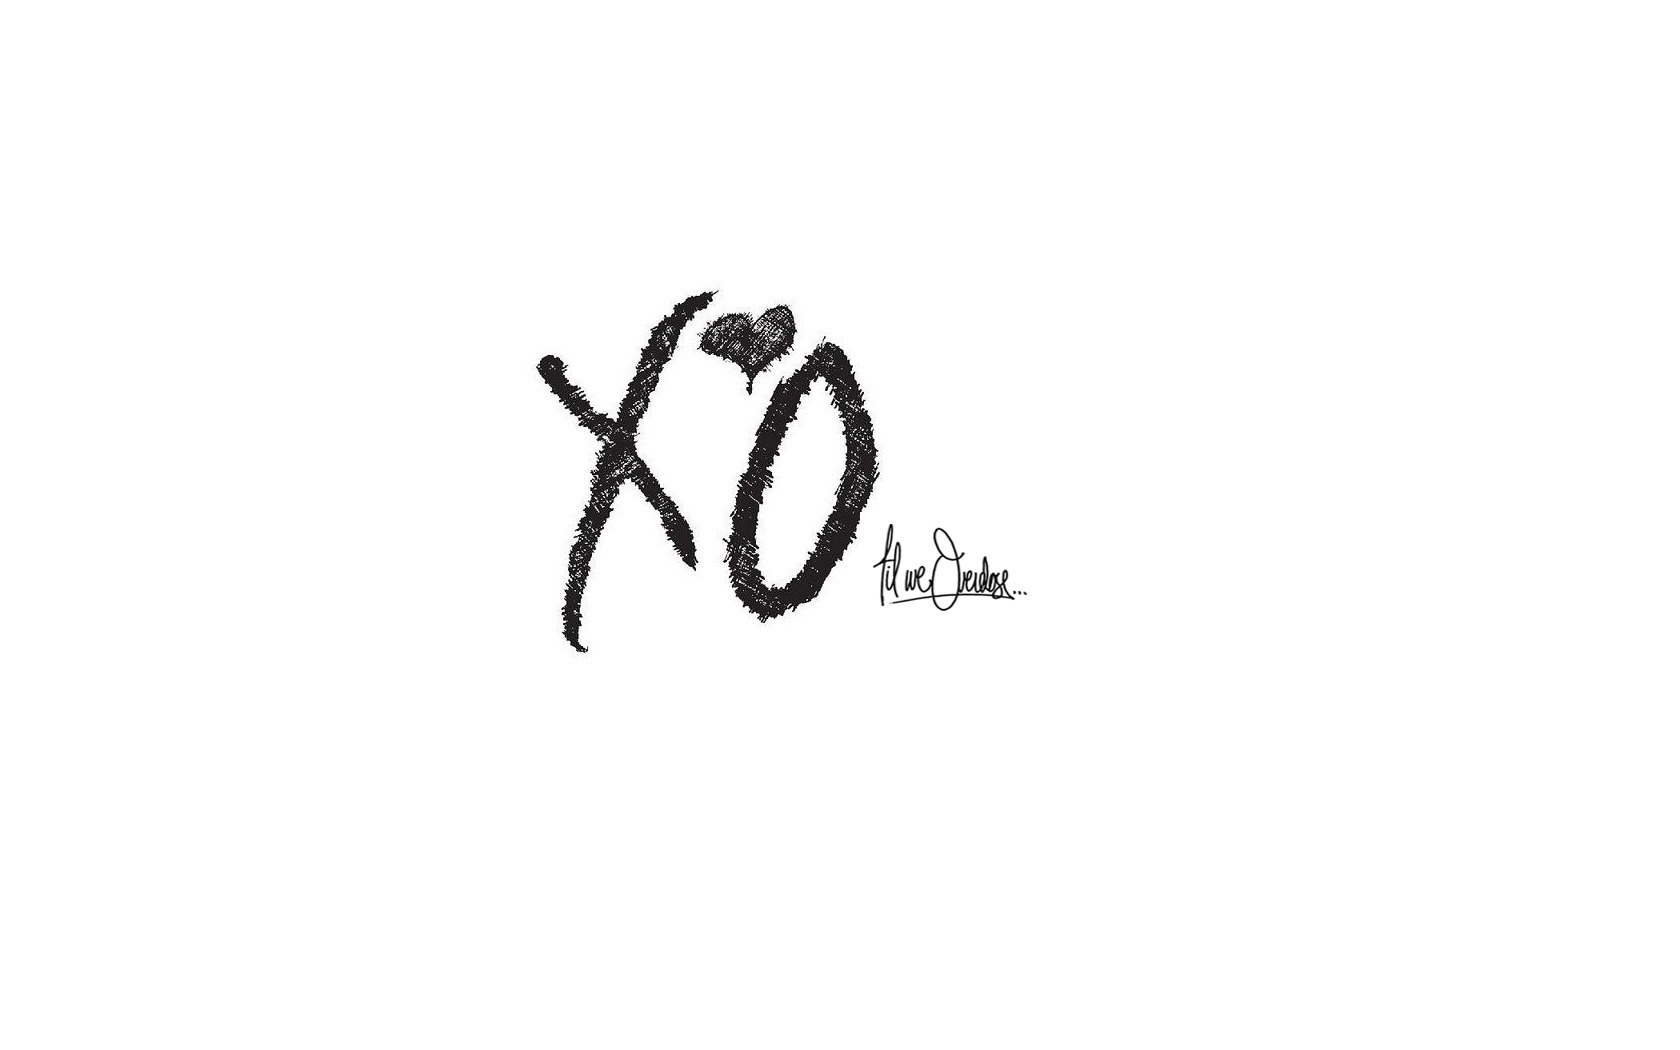 Xo The Weeknd Quotes. QuotesGram